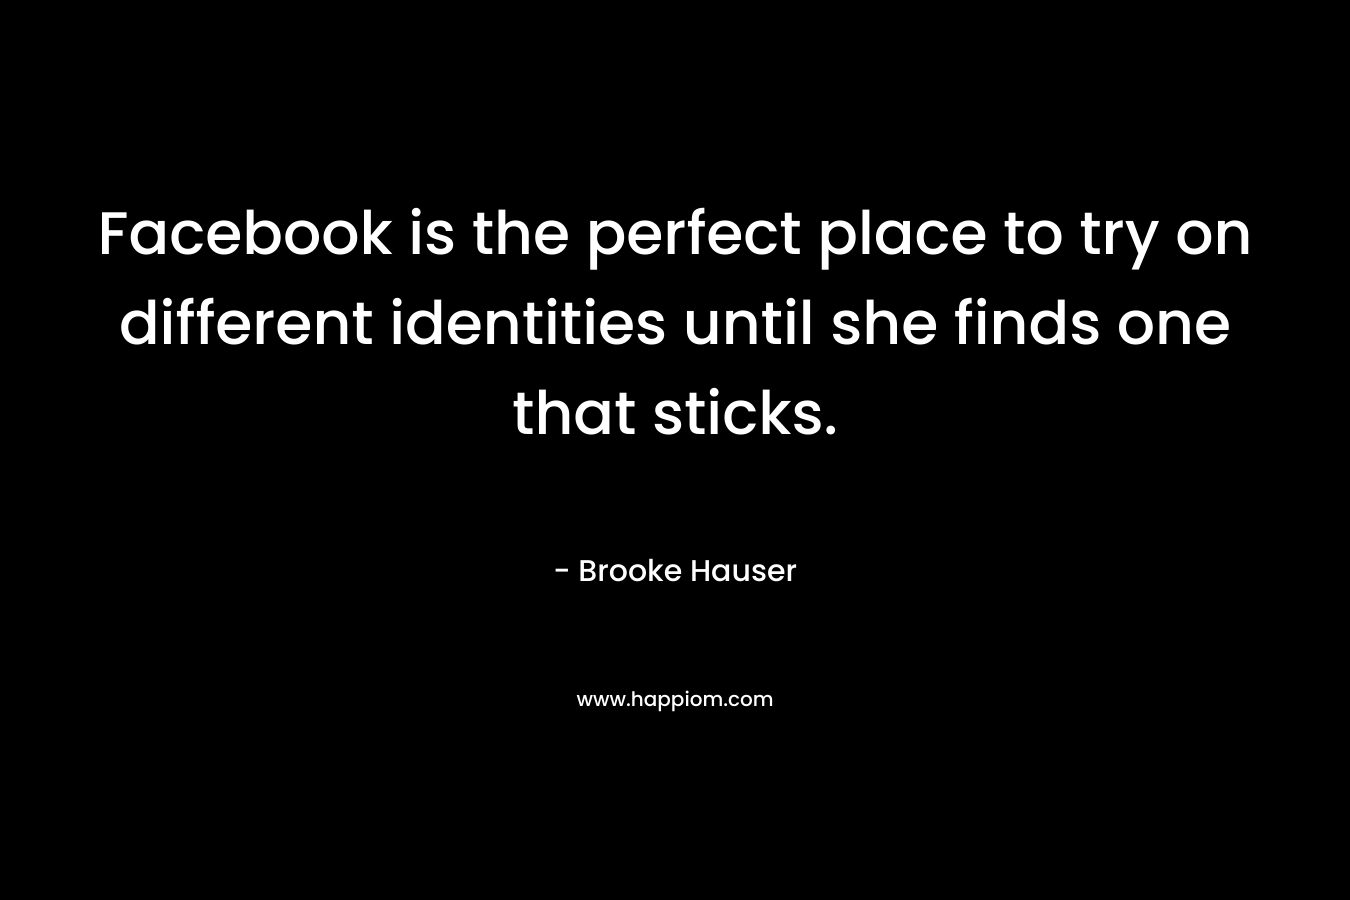 Facebook is the perfect place to try on different identities until she finds one that sticks. – Brooke Hauser